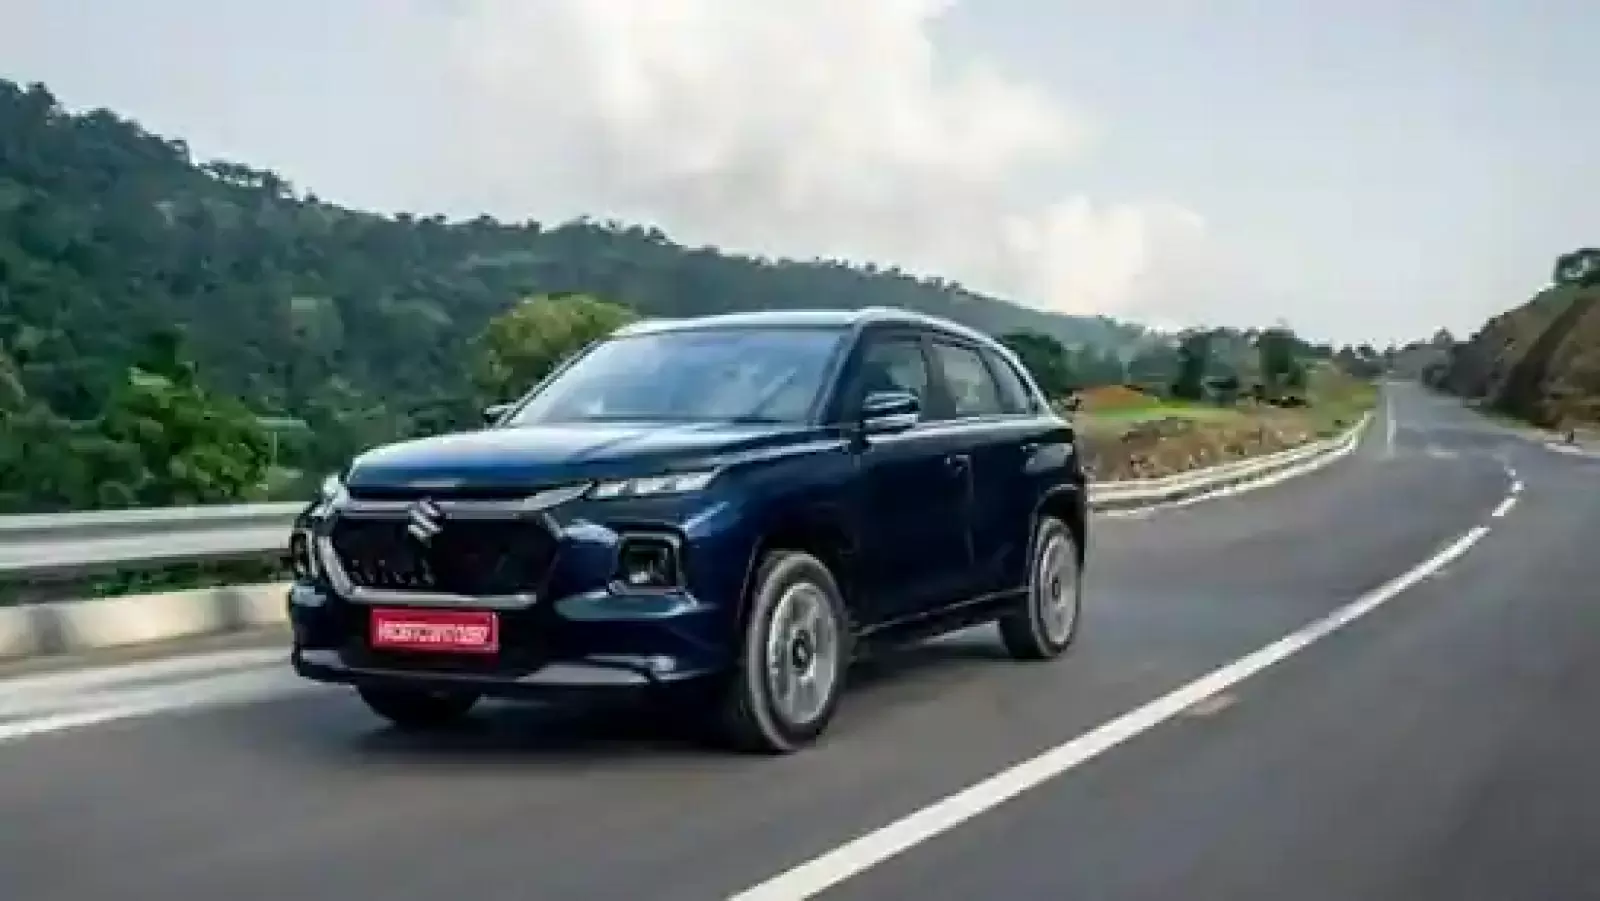 Maruti Escudo: Based on the Grand Vitara, Maruti is planning to introduce a seven-seat SUV under this name; Know details